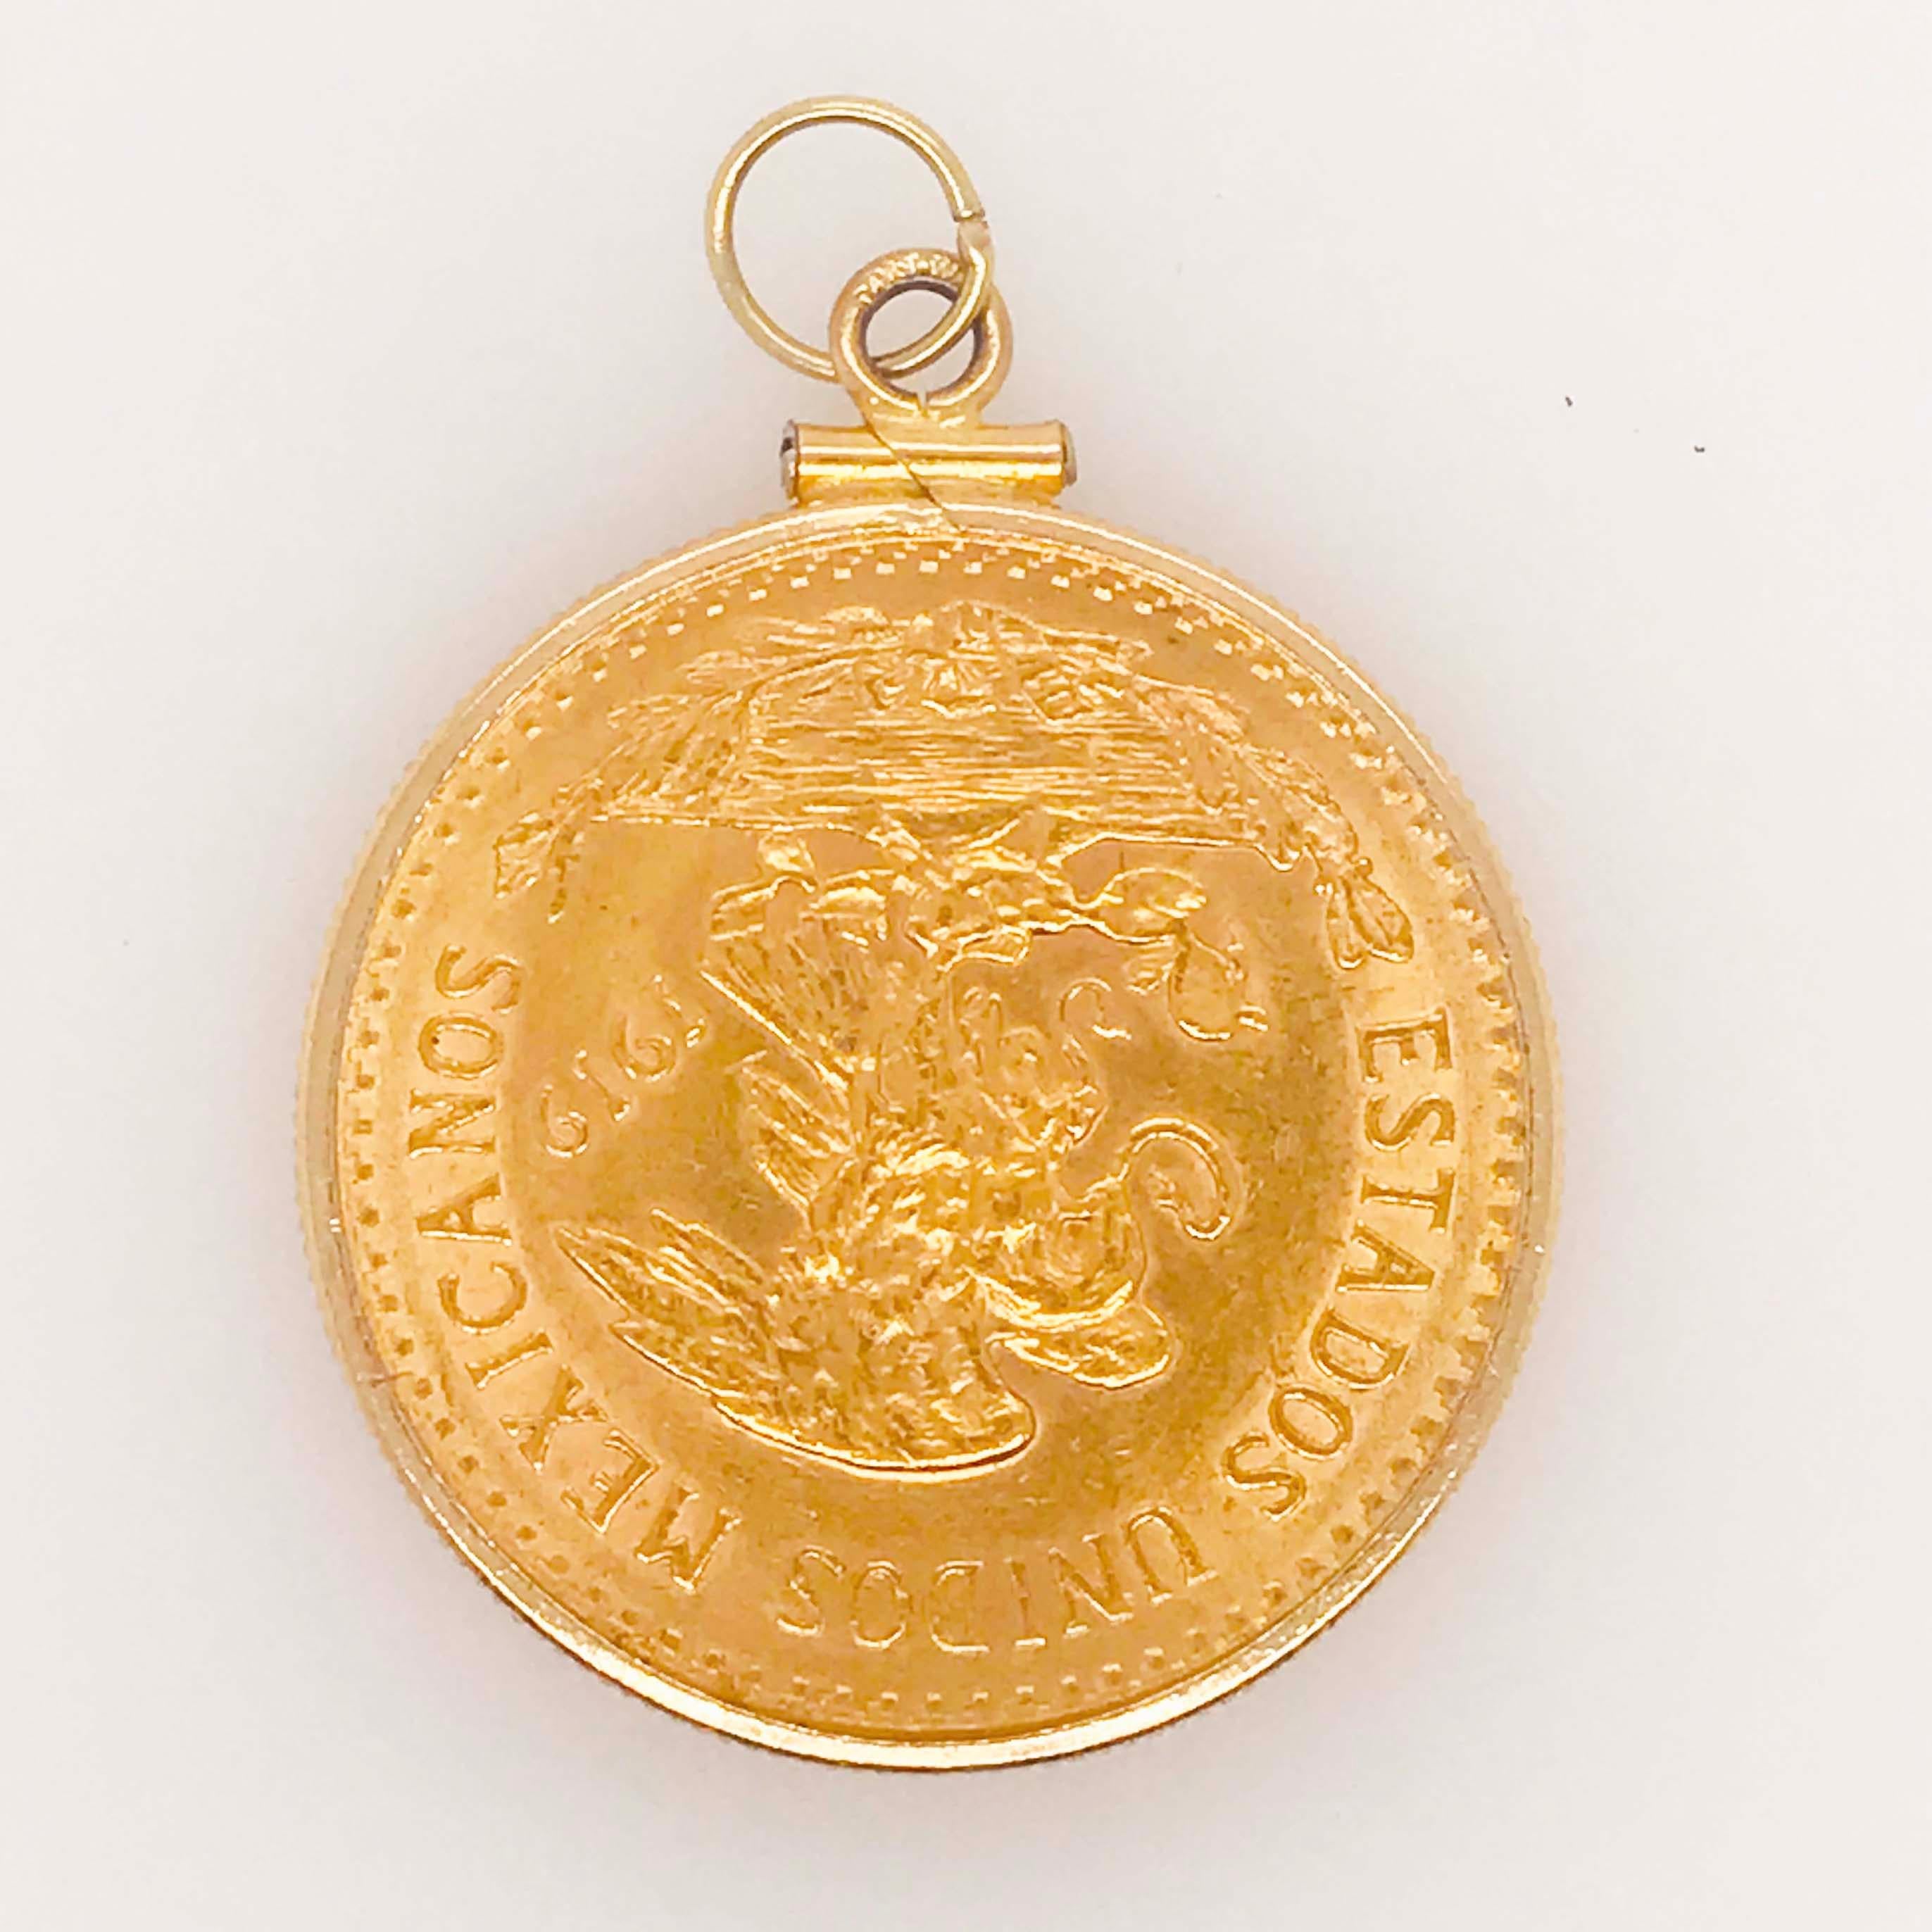 The Mexican Peso was originally released in 1921 in honor of Centenario, Mexico's 1st Century of Freedom! 
This authentic Mexico 20 dollar coin pendant has an original Mexico Veinte Peso gold coin set in a 14k yellow gold coin bezel pendant. The